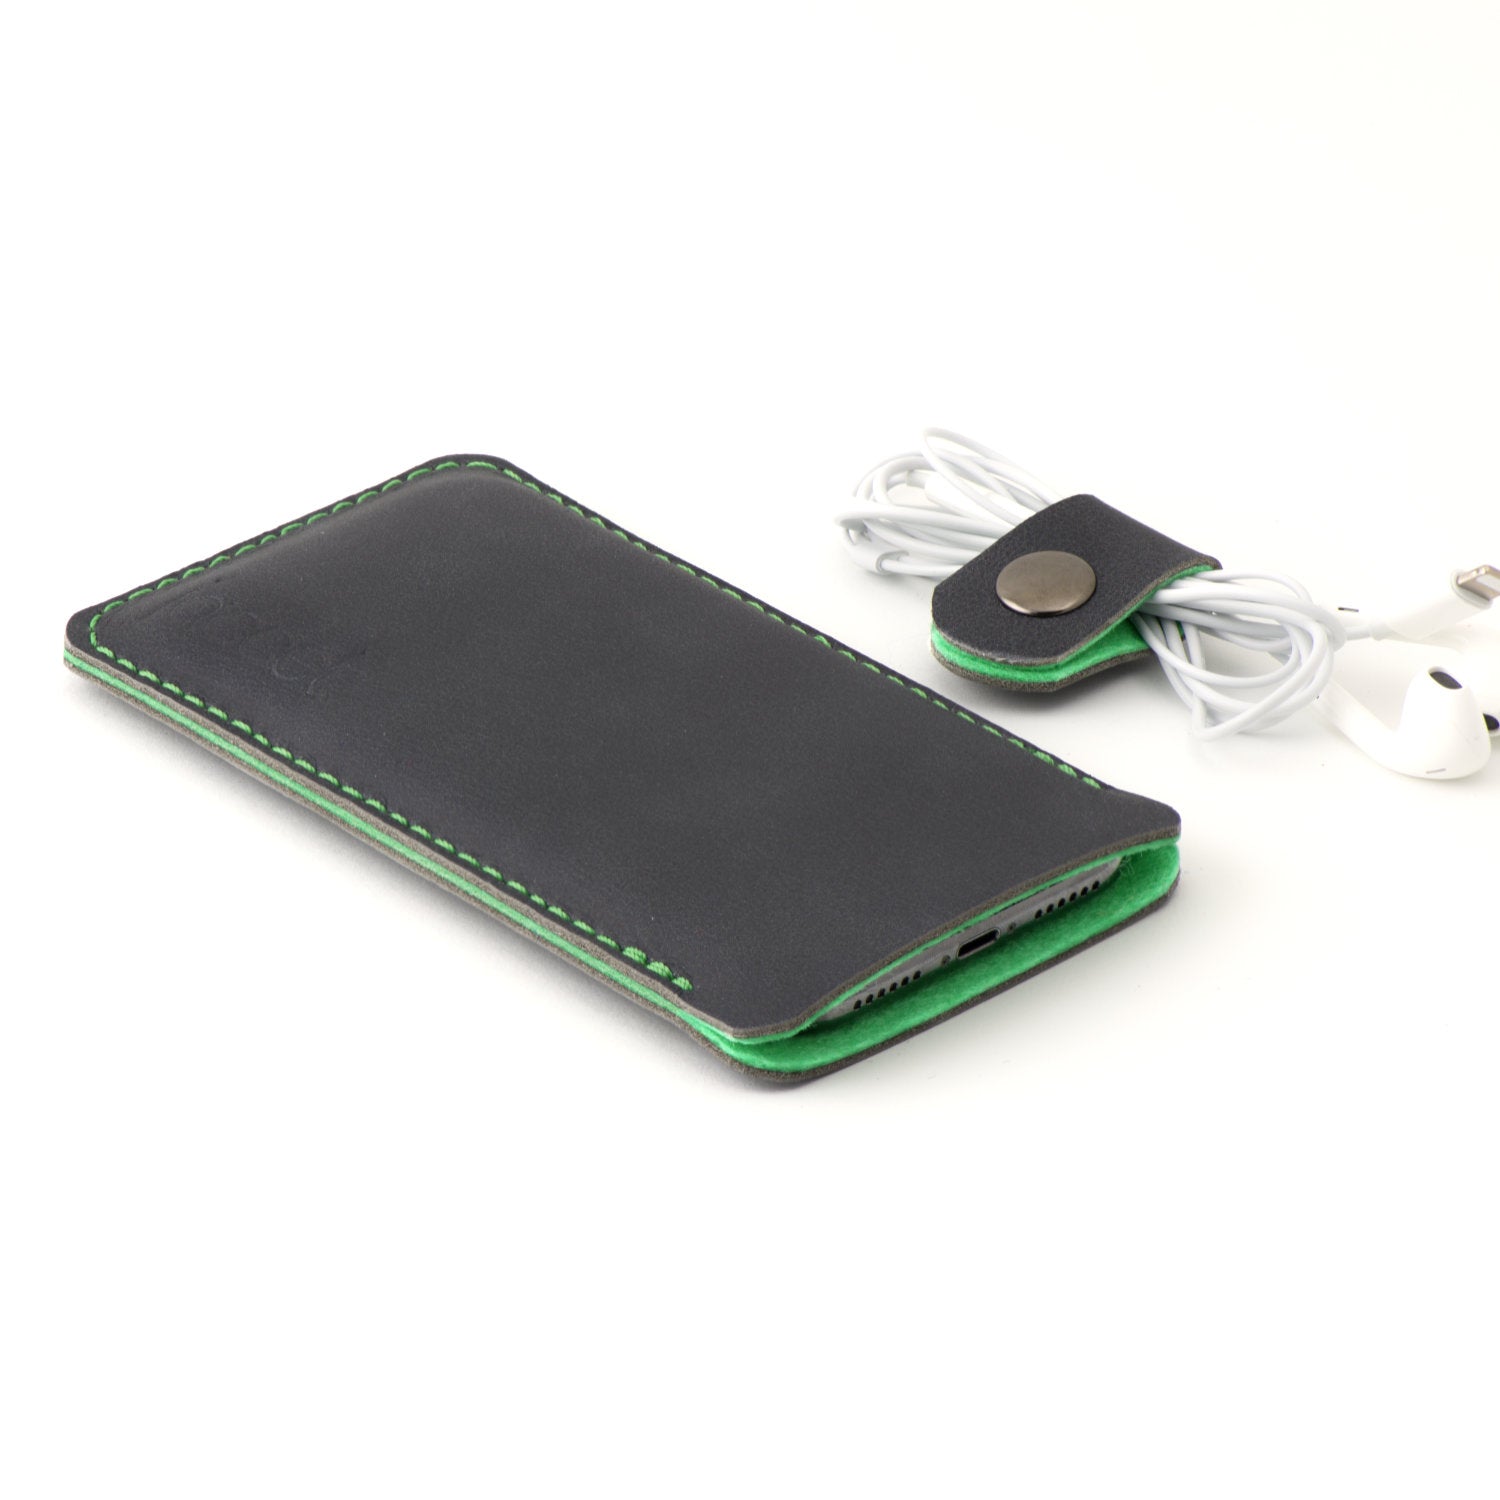 JACCET leather Samsung Galaxy sleeve - anthracite/black leather with green wool felt. 100% Handmade